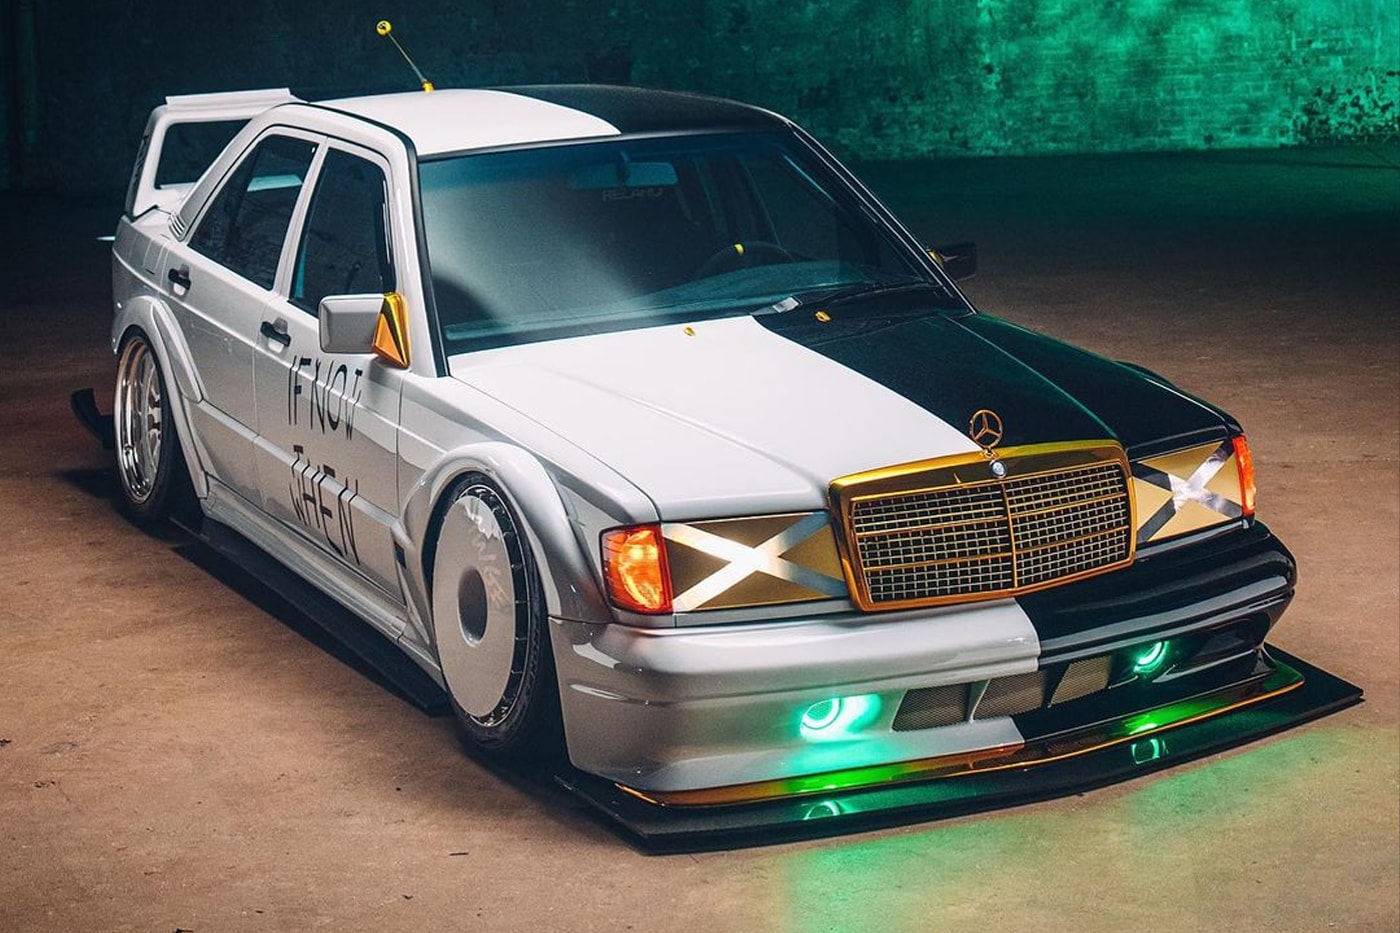 https://image-cdn.hypb.st/https%3A%2F%2Fhypebeast.com%2Fimage%2F2022%2F11%2Fasap-rocky-real-life-need-for-speed-mercedes-benz-190e-evo-first-look-info-002.jpg?cbr=1&q=90